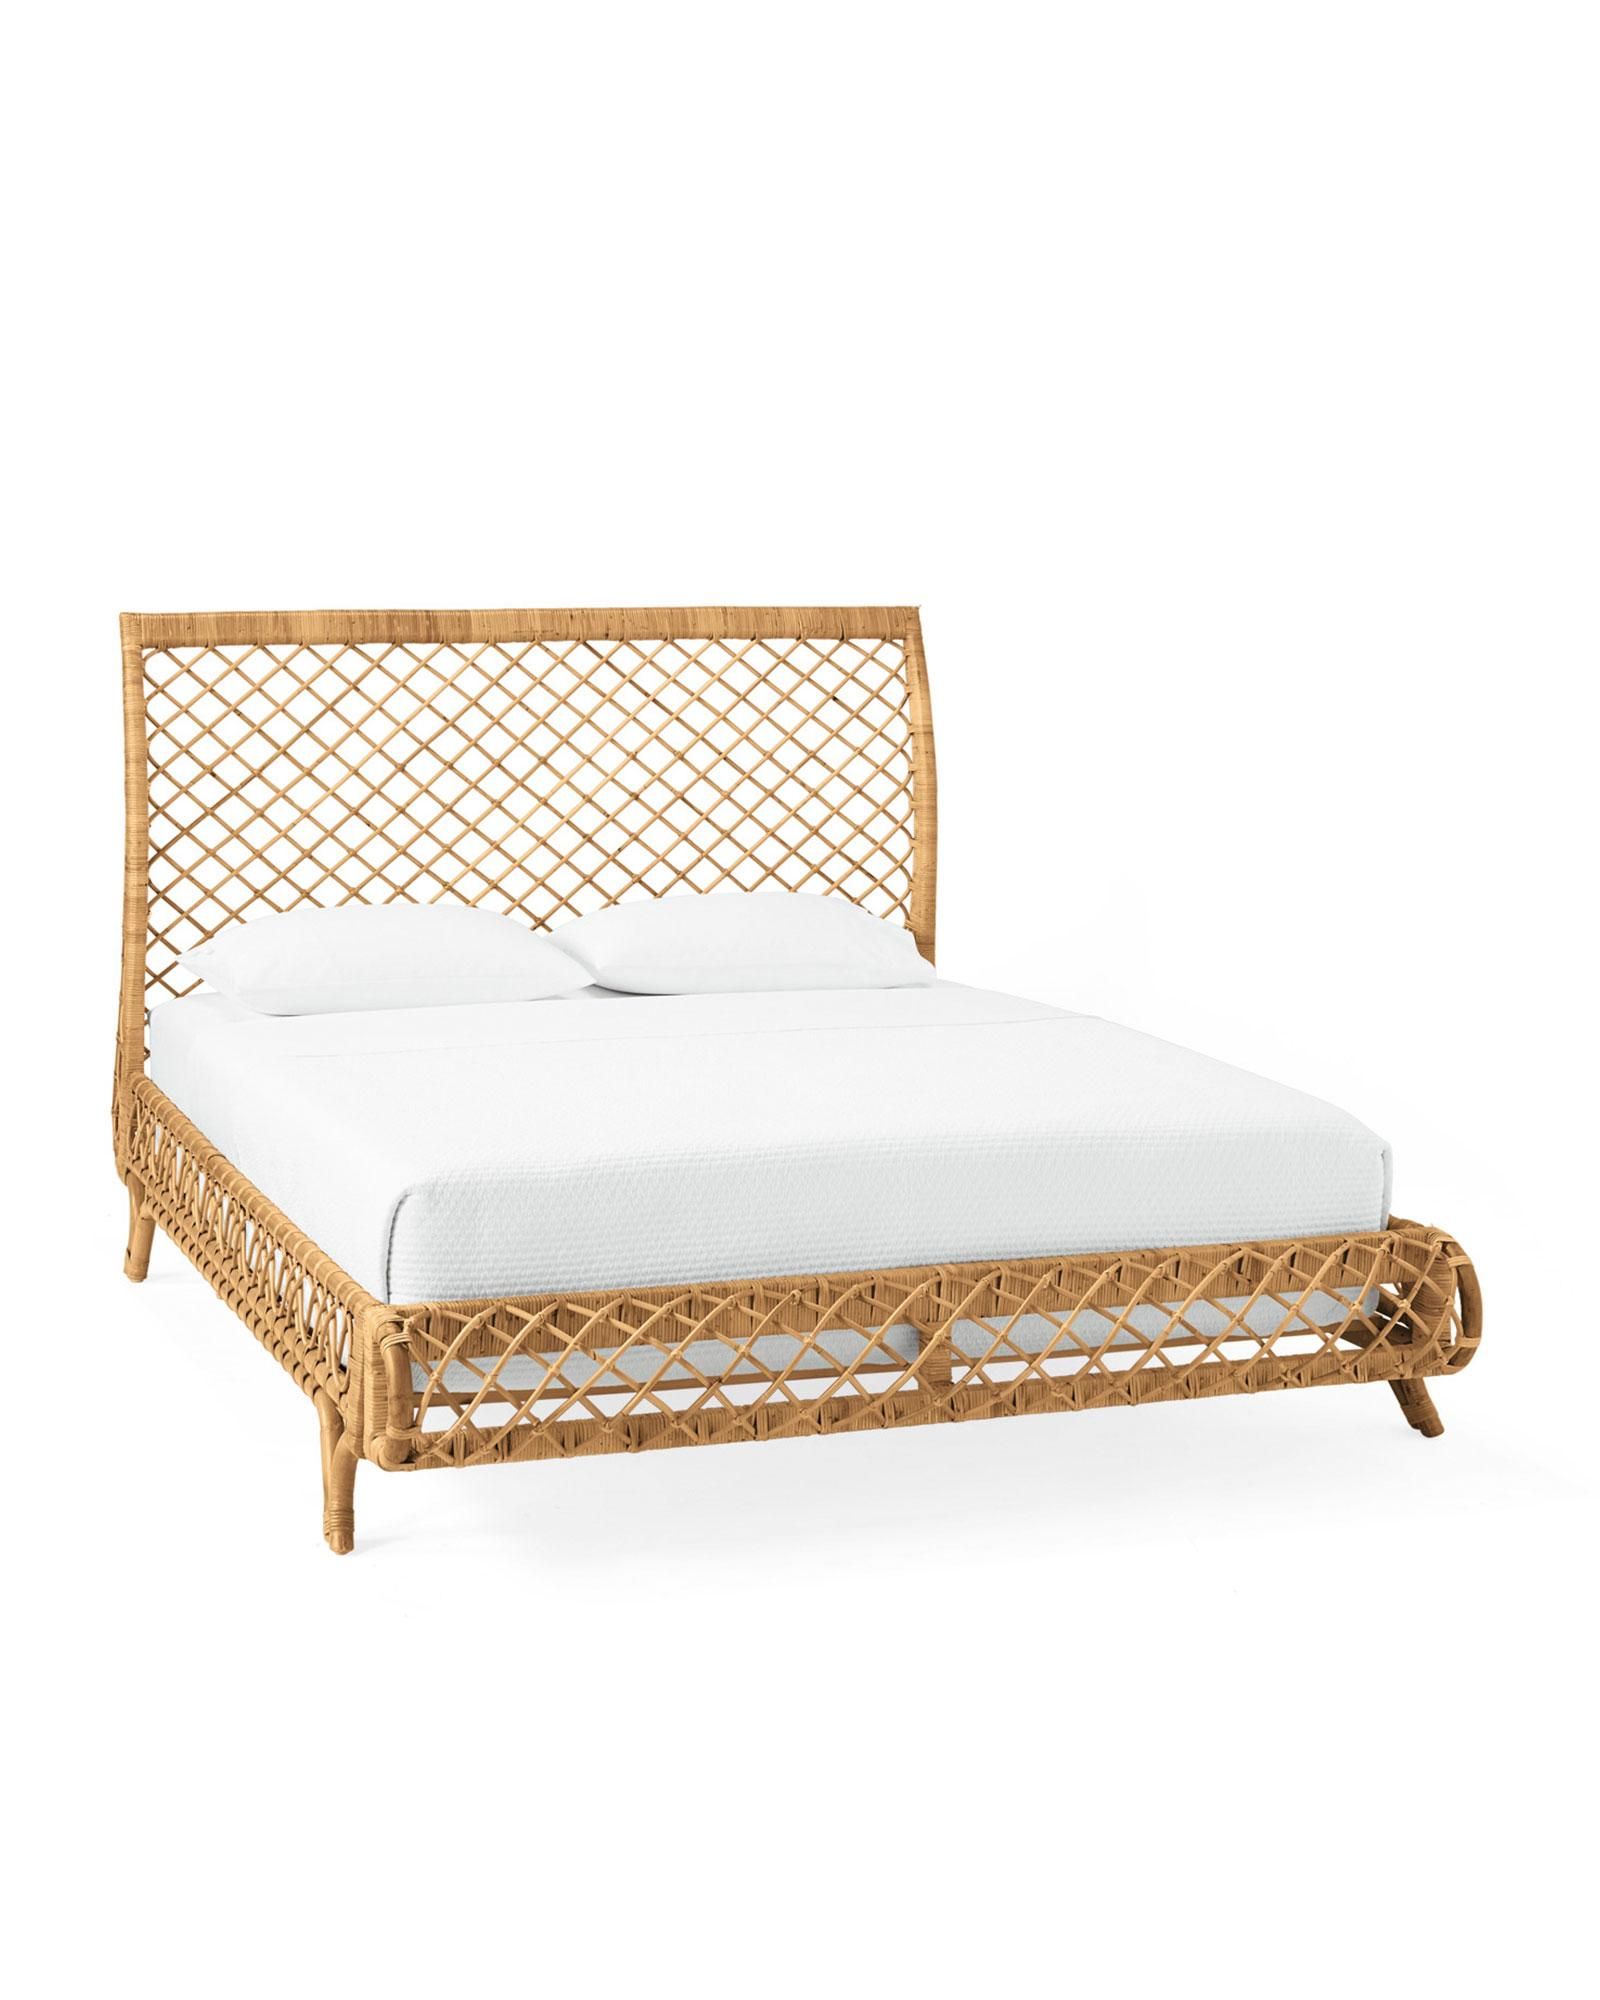 Avalon Rattan Bed | Serena and Lily